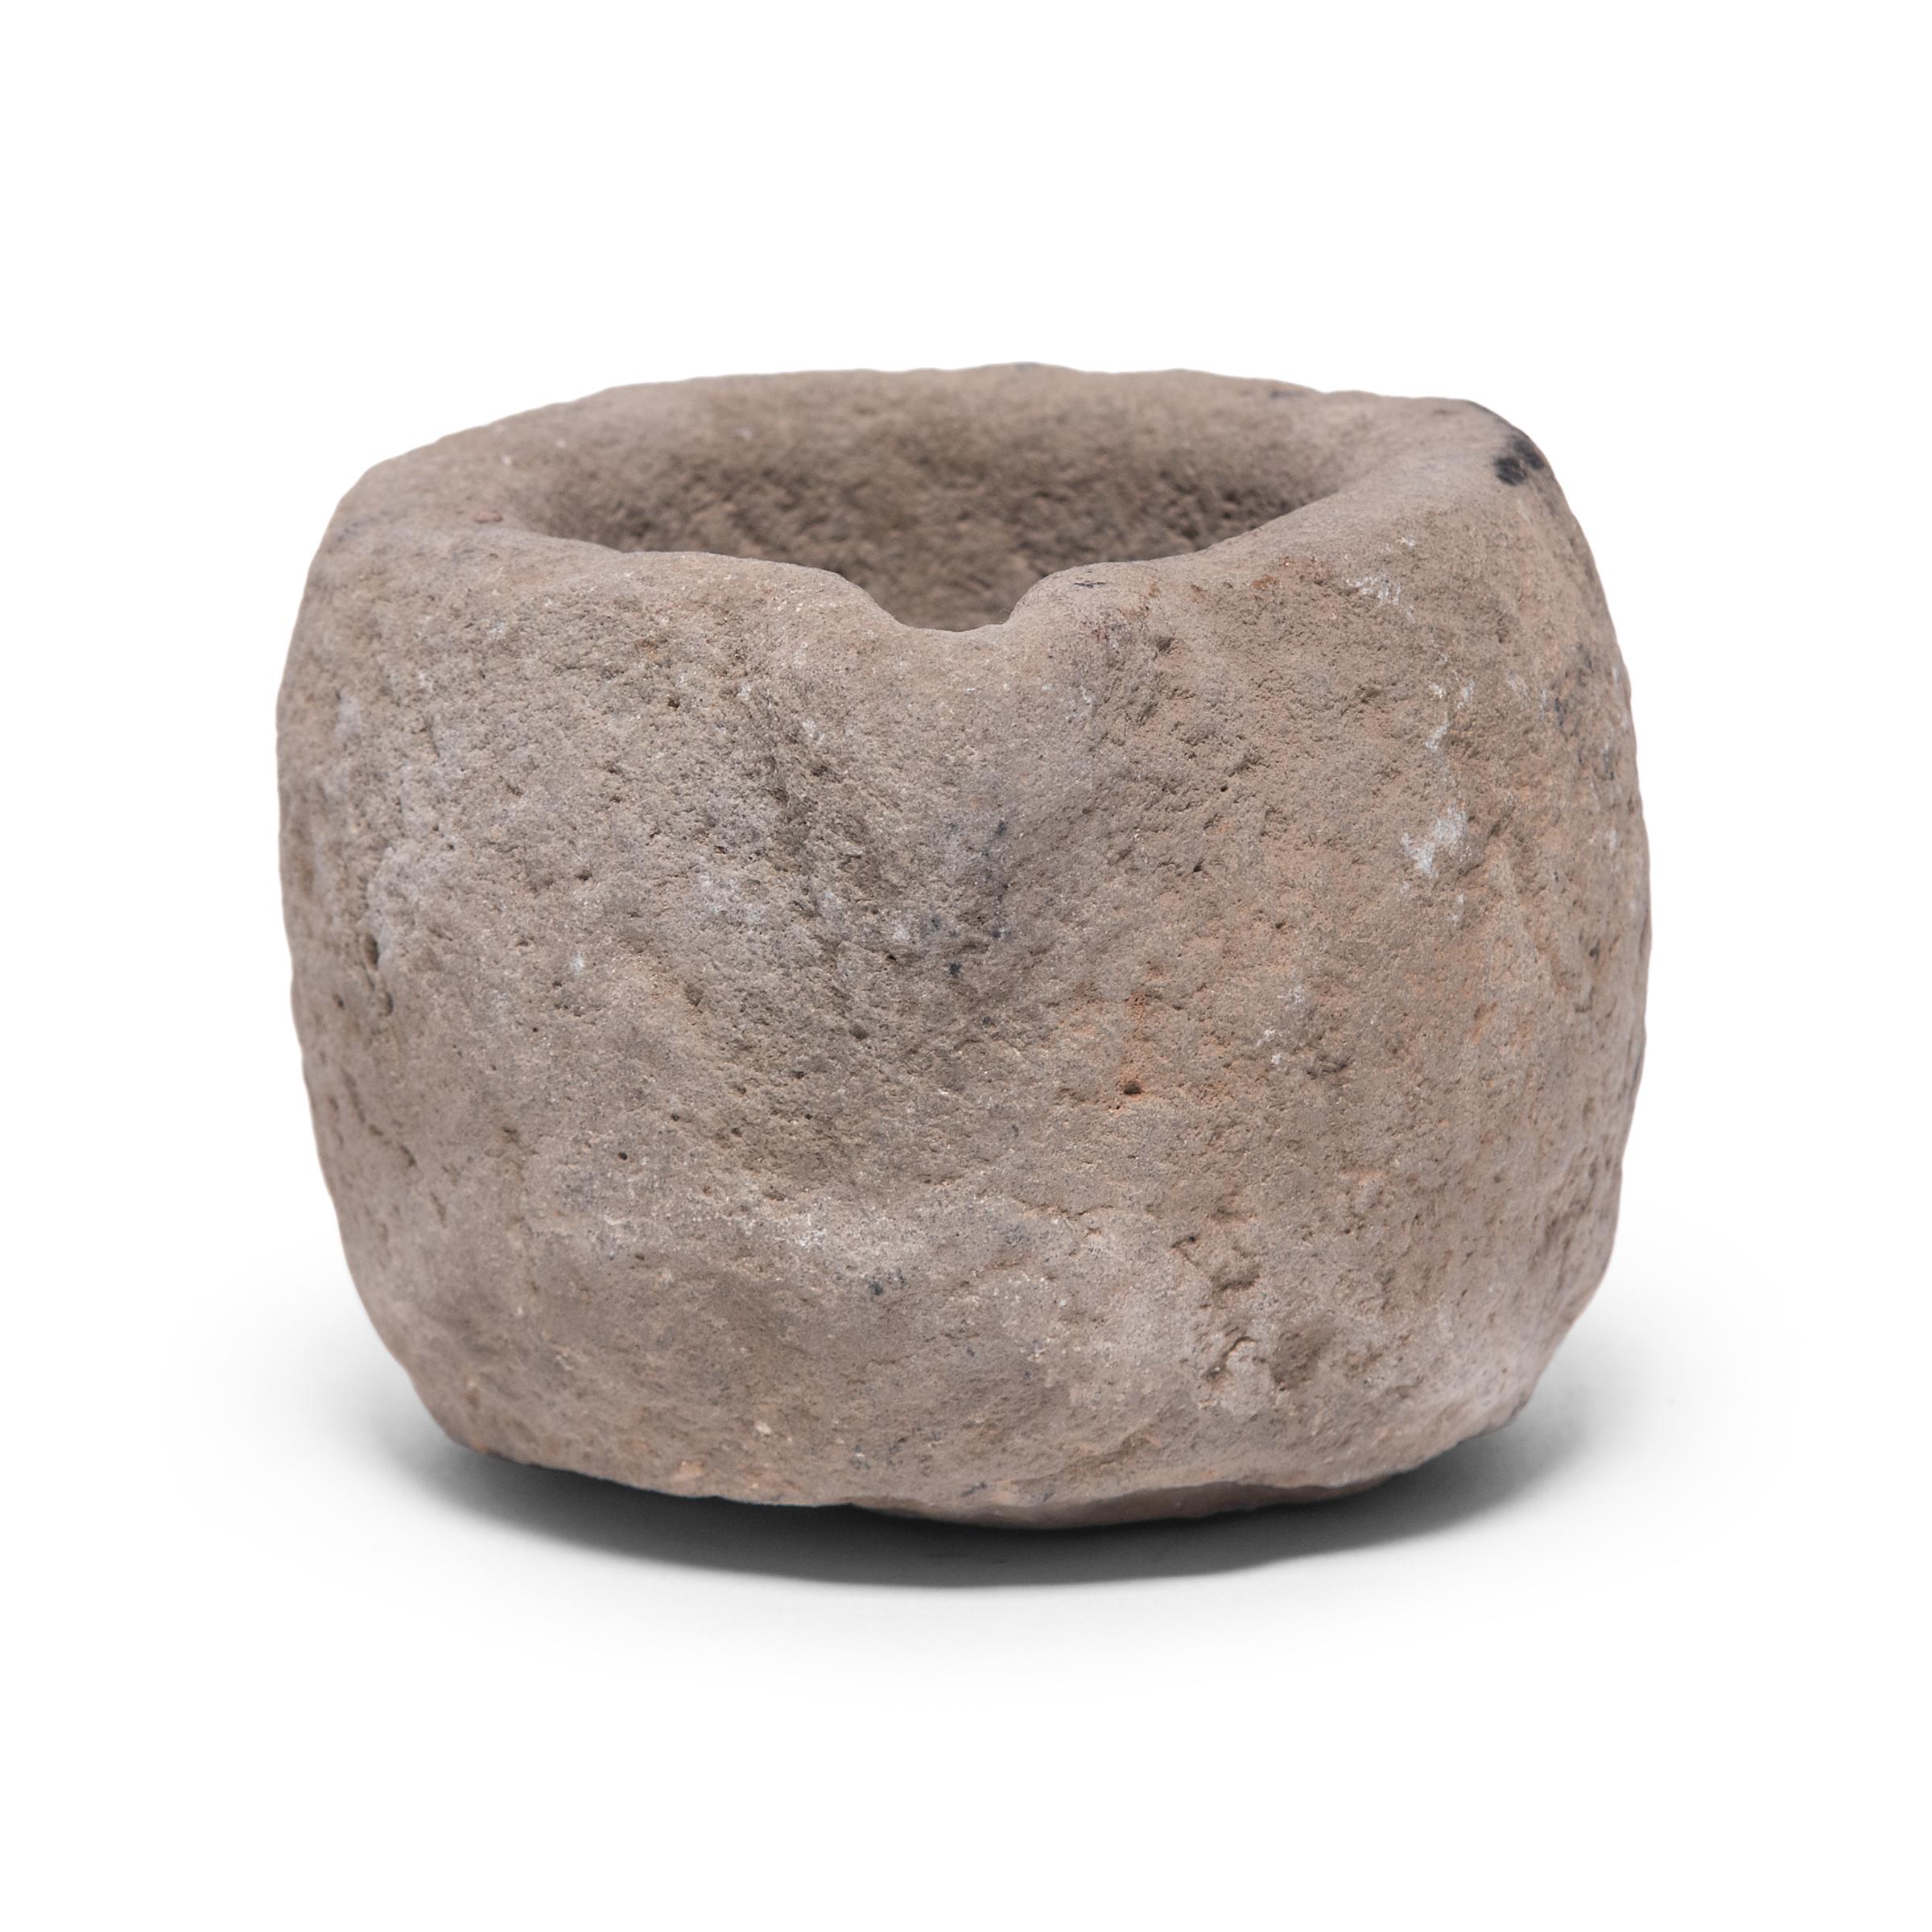 Hand carved from a single block of limestone, this round stone vessel is an early 20th century mortar once used daily in a Provincial kitchen to grind herbs, spices, and other foods. Used as a decorative vessel or tabletop planter, the mortar's